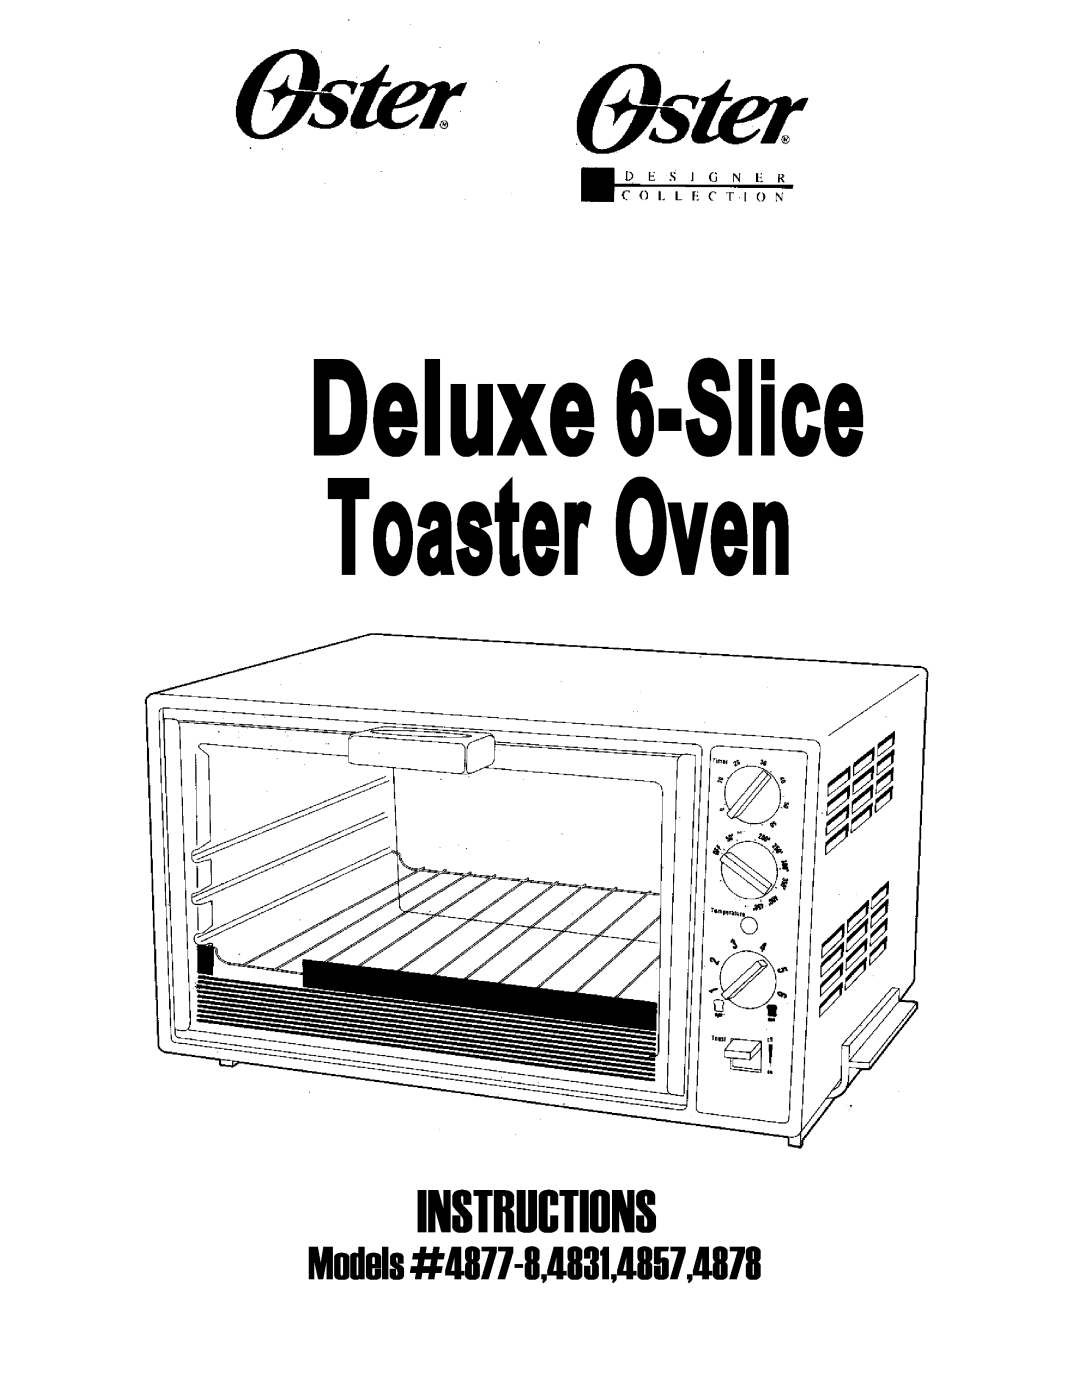 Oster manual Deluxe 6-Slice Toaster Oven, Instructions, Models #4877-8,4831,4857,4878 